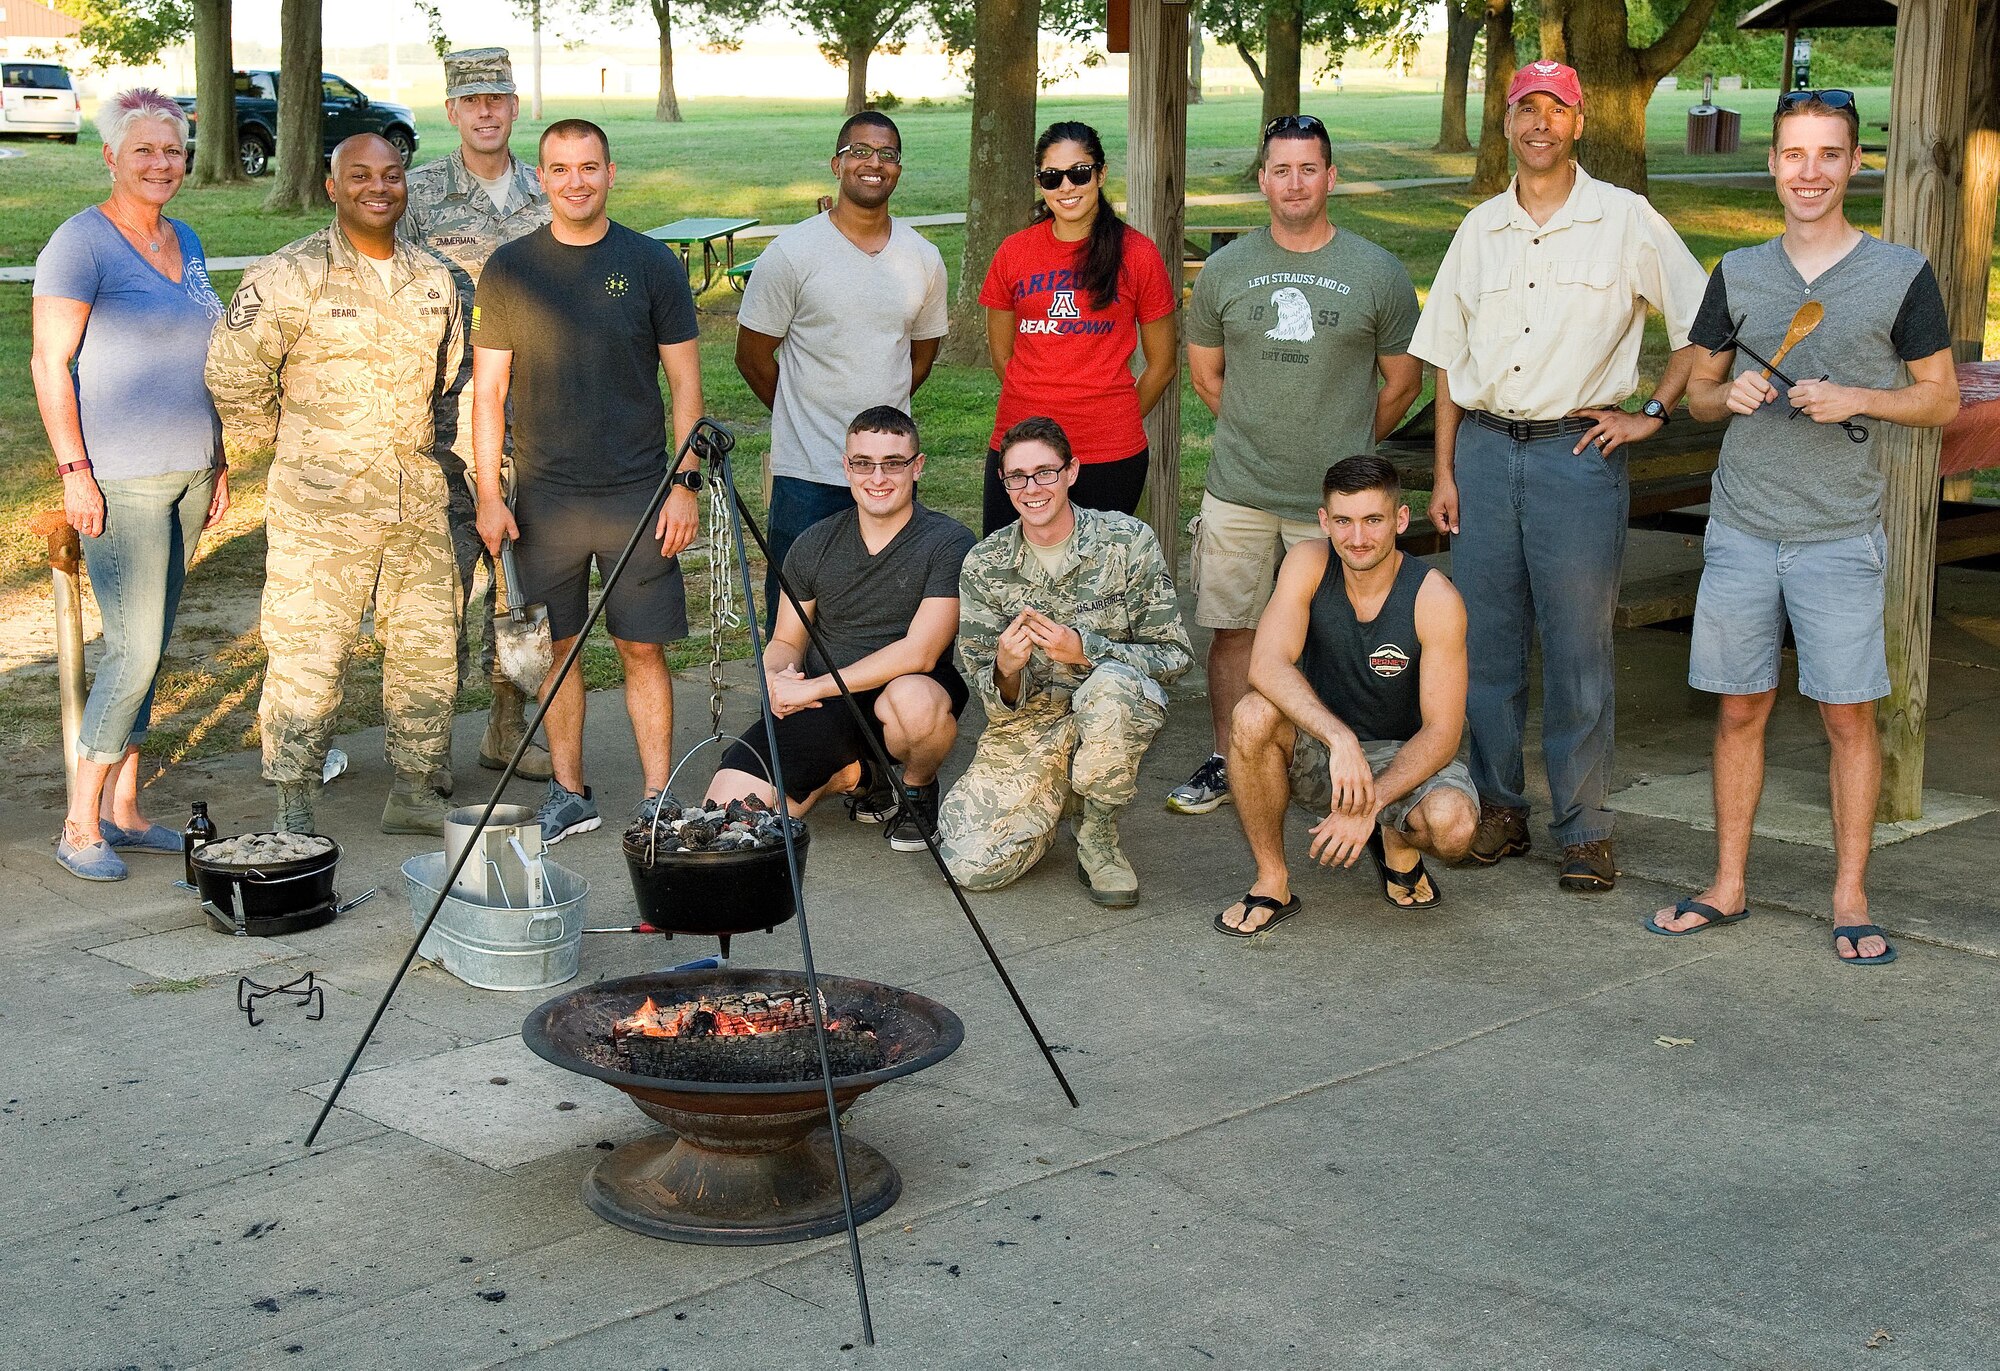 Dorm to Gourm participants pose for a photo Sept. 13, 2016, at the Eagle’s Nest picnic area on Dover Air Force Base, Del. Col. Randy Boswell, 436th Mission Support Group commander, Senior Airmen William Johnson and Zachary Cacicia, 436th Airlift Wing photojournalists, demonstrated how to prepare and cook beef stew, chicken, lasagna and blueberry cobbler using Dutch ovens during the Dorm to Gourm class. (U.S. Air Force photo by Roland Balik)